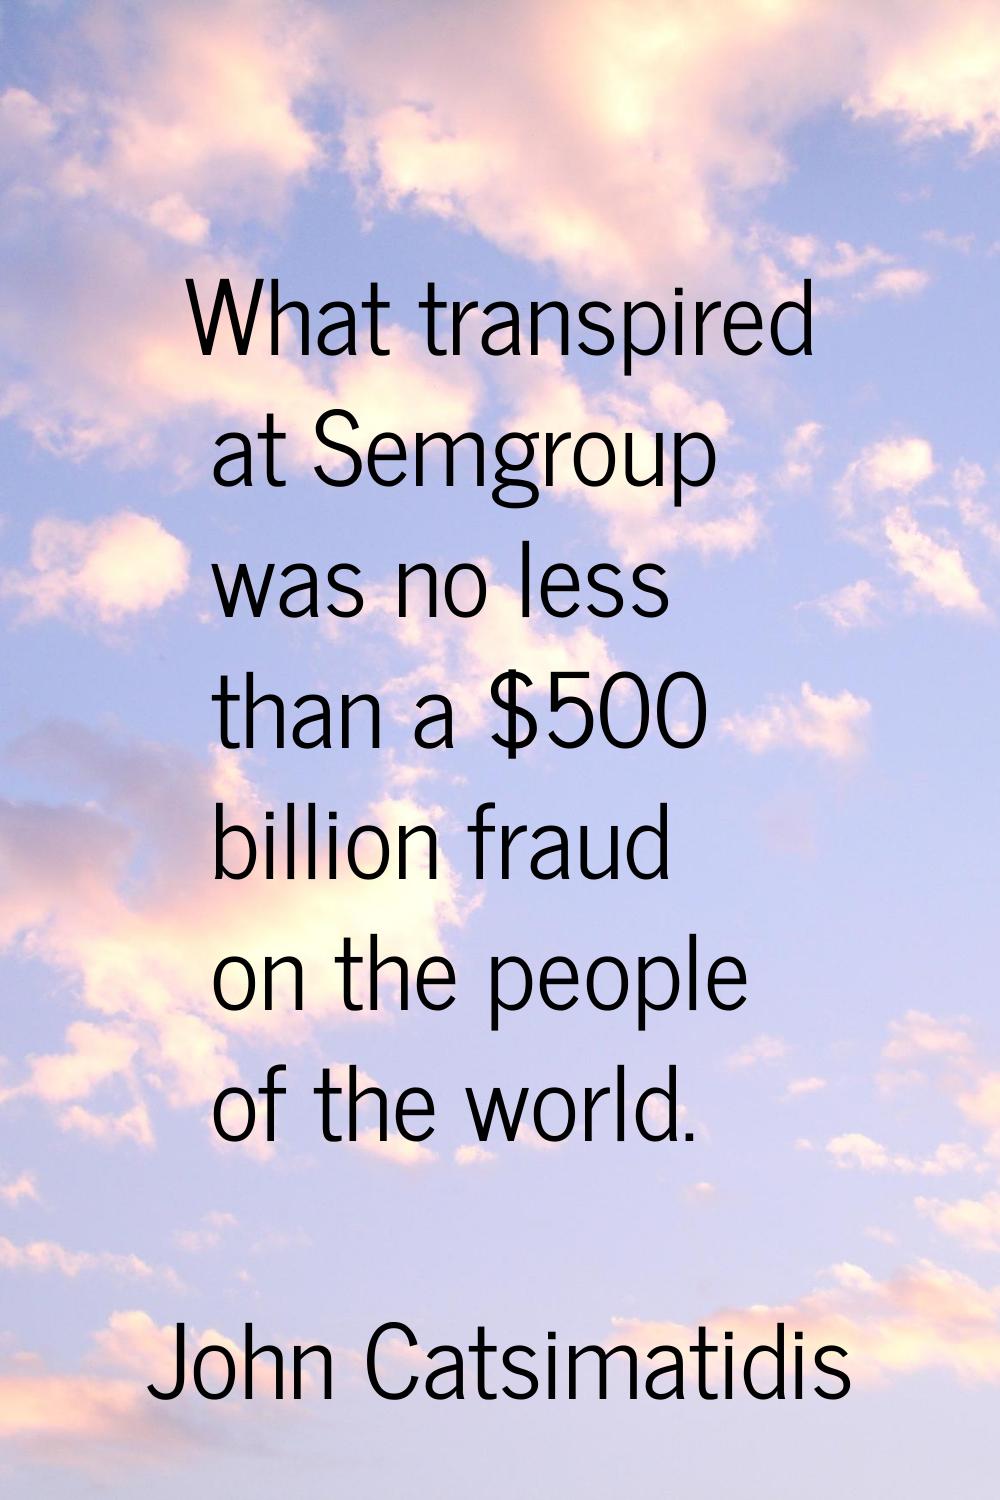 What transpired at Semgroup was no less than a $500 billion fraud on the people of the world.